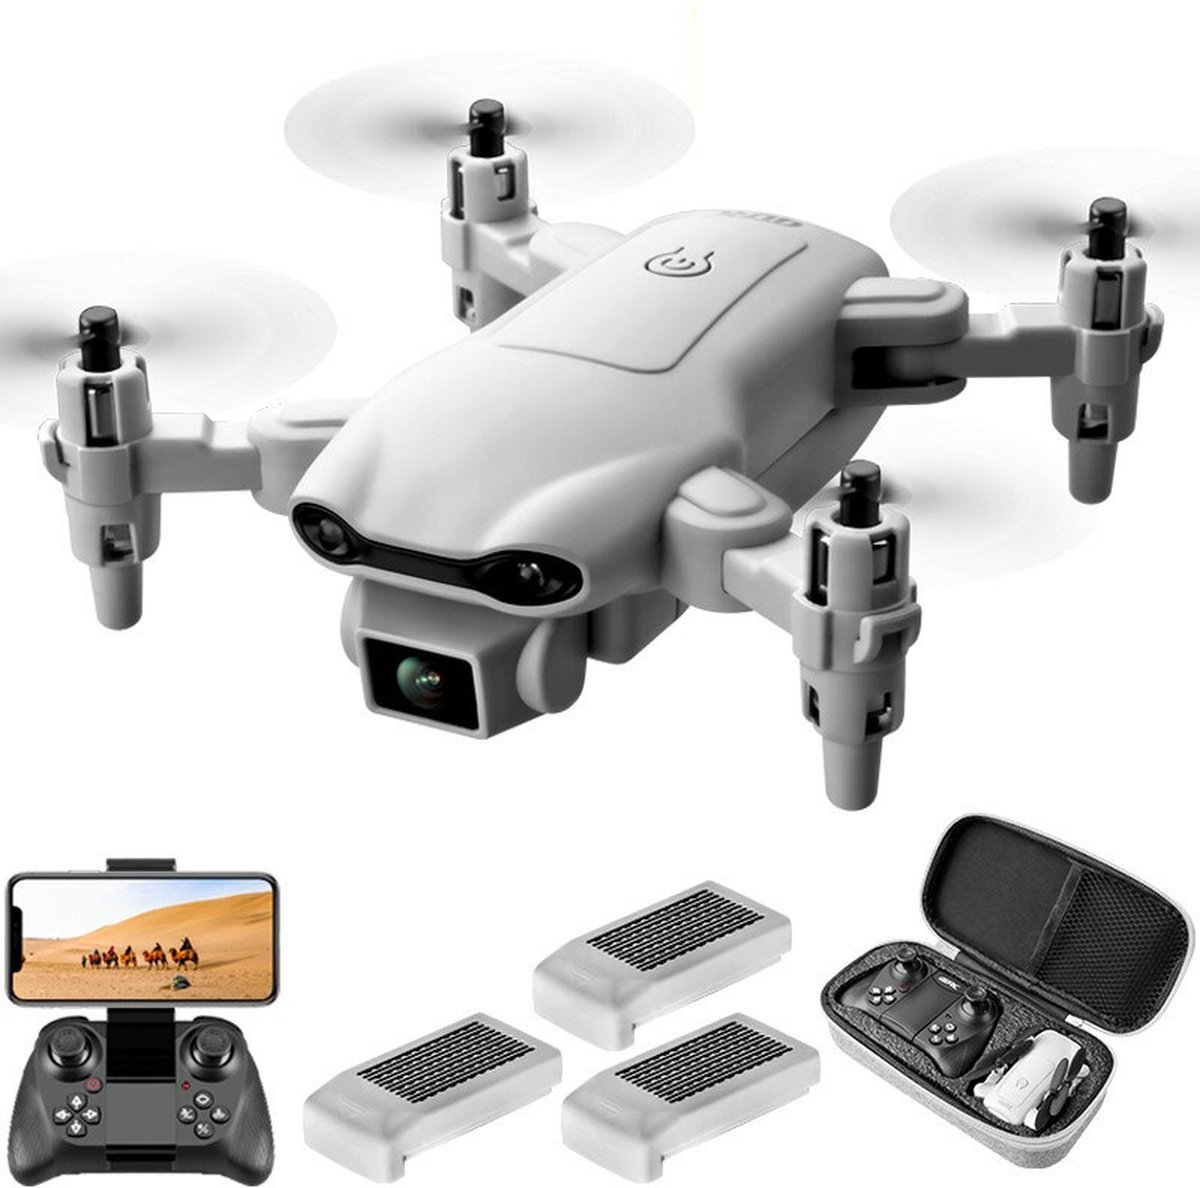 Supremium V9 RC Mini Drone 4K Dubbele Camera | Luchtfotografie Helikopter | Opvouwbare Quadcopter Drone-speelgoed | HD-Groothoekcamera